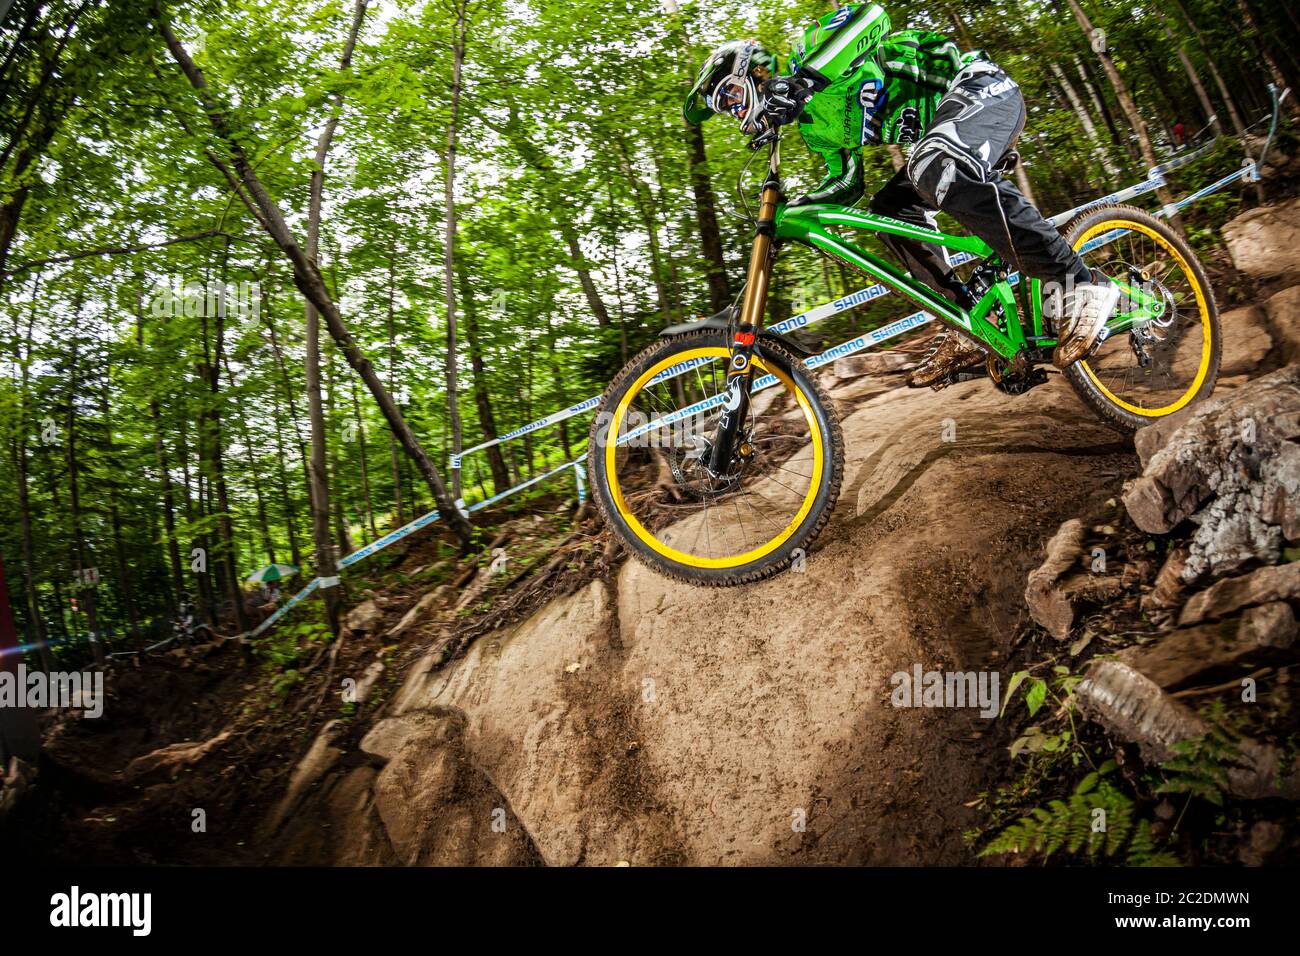 MONT ST ANNE, CANADA - JULY 3, 2011. Fabien Barel (FRA) racing for Team Mondraker at the UCI Downhill Mountain Bike World Cup Stock Photo